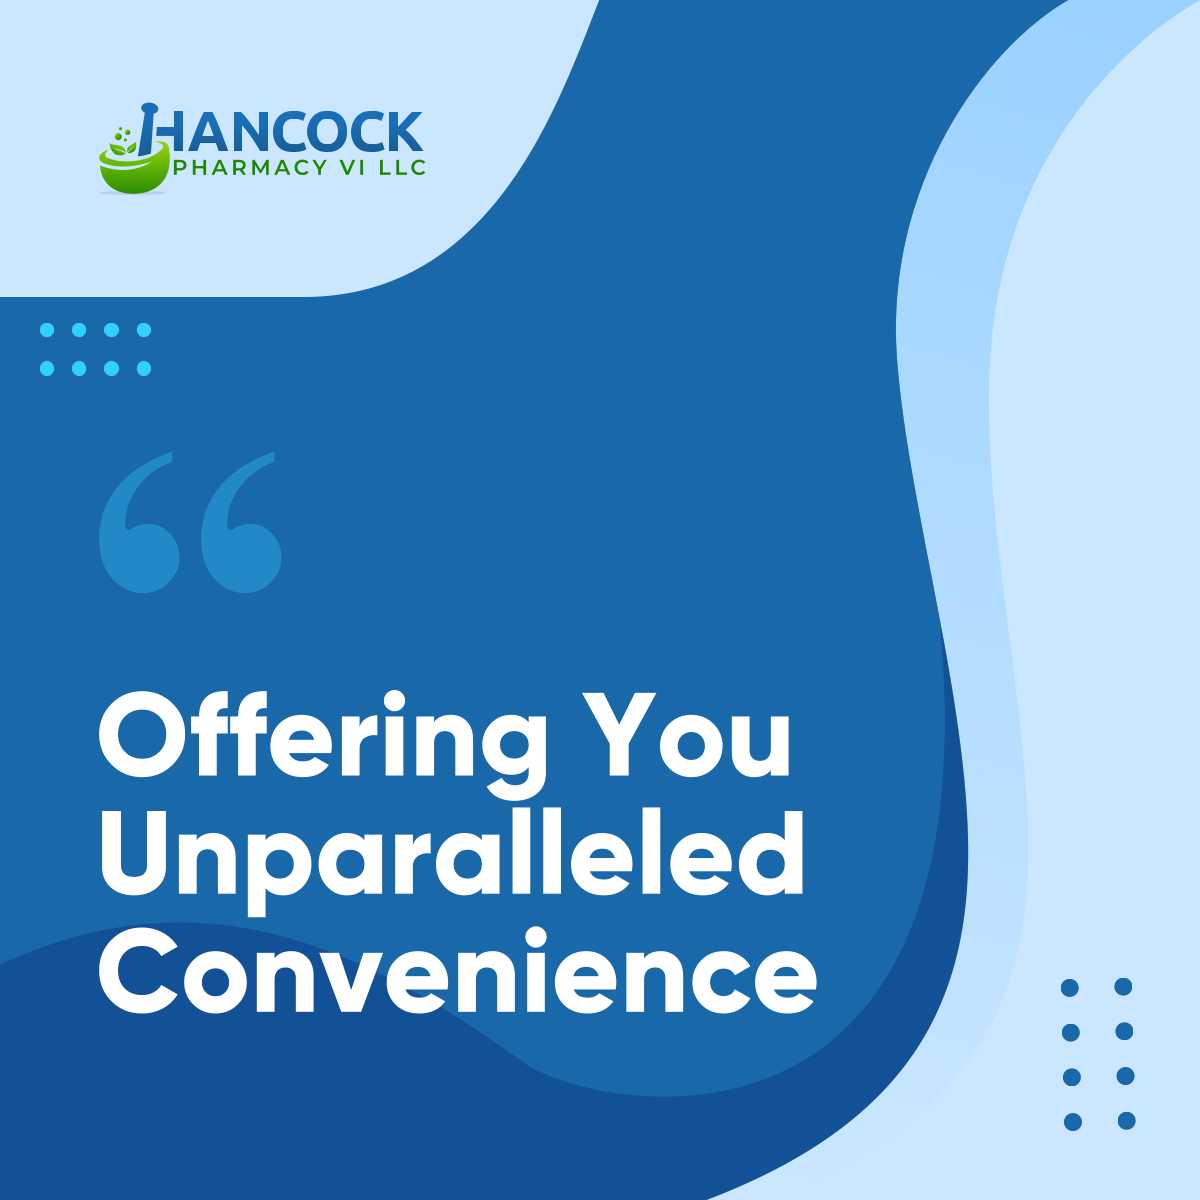 At HANCOCK PHARMACY VI LLC, we understand that it's not always easy to find time to pick up your prescriptions. With our aim to offer you outstanding convenience, we offer free delivery and pick-up to your homes or facilities! 

Call us today!

#PharmacyServices #AnsoniaCT